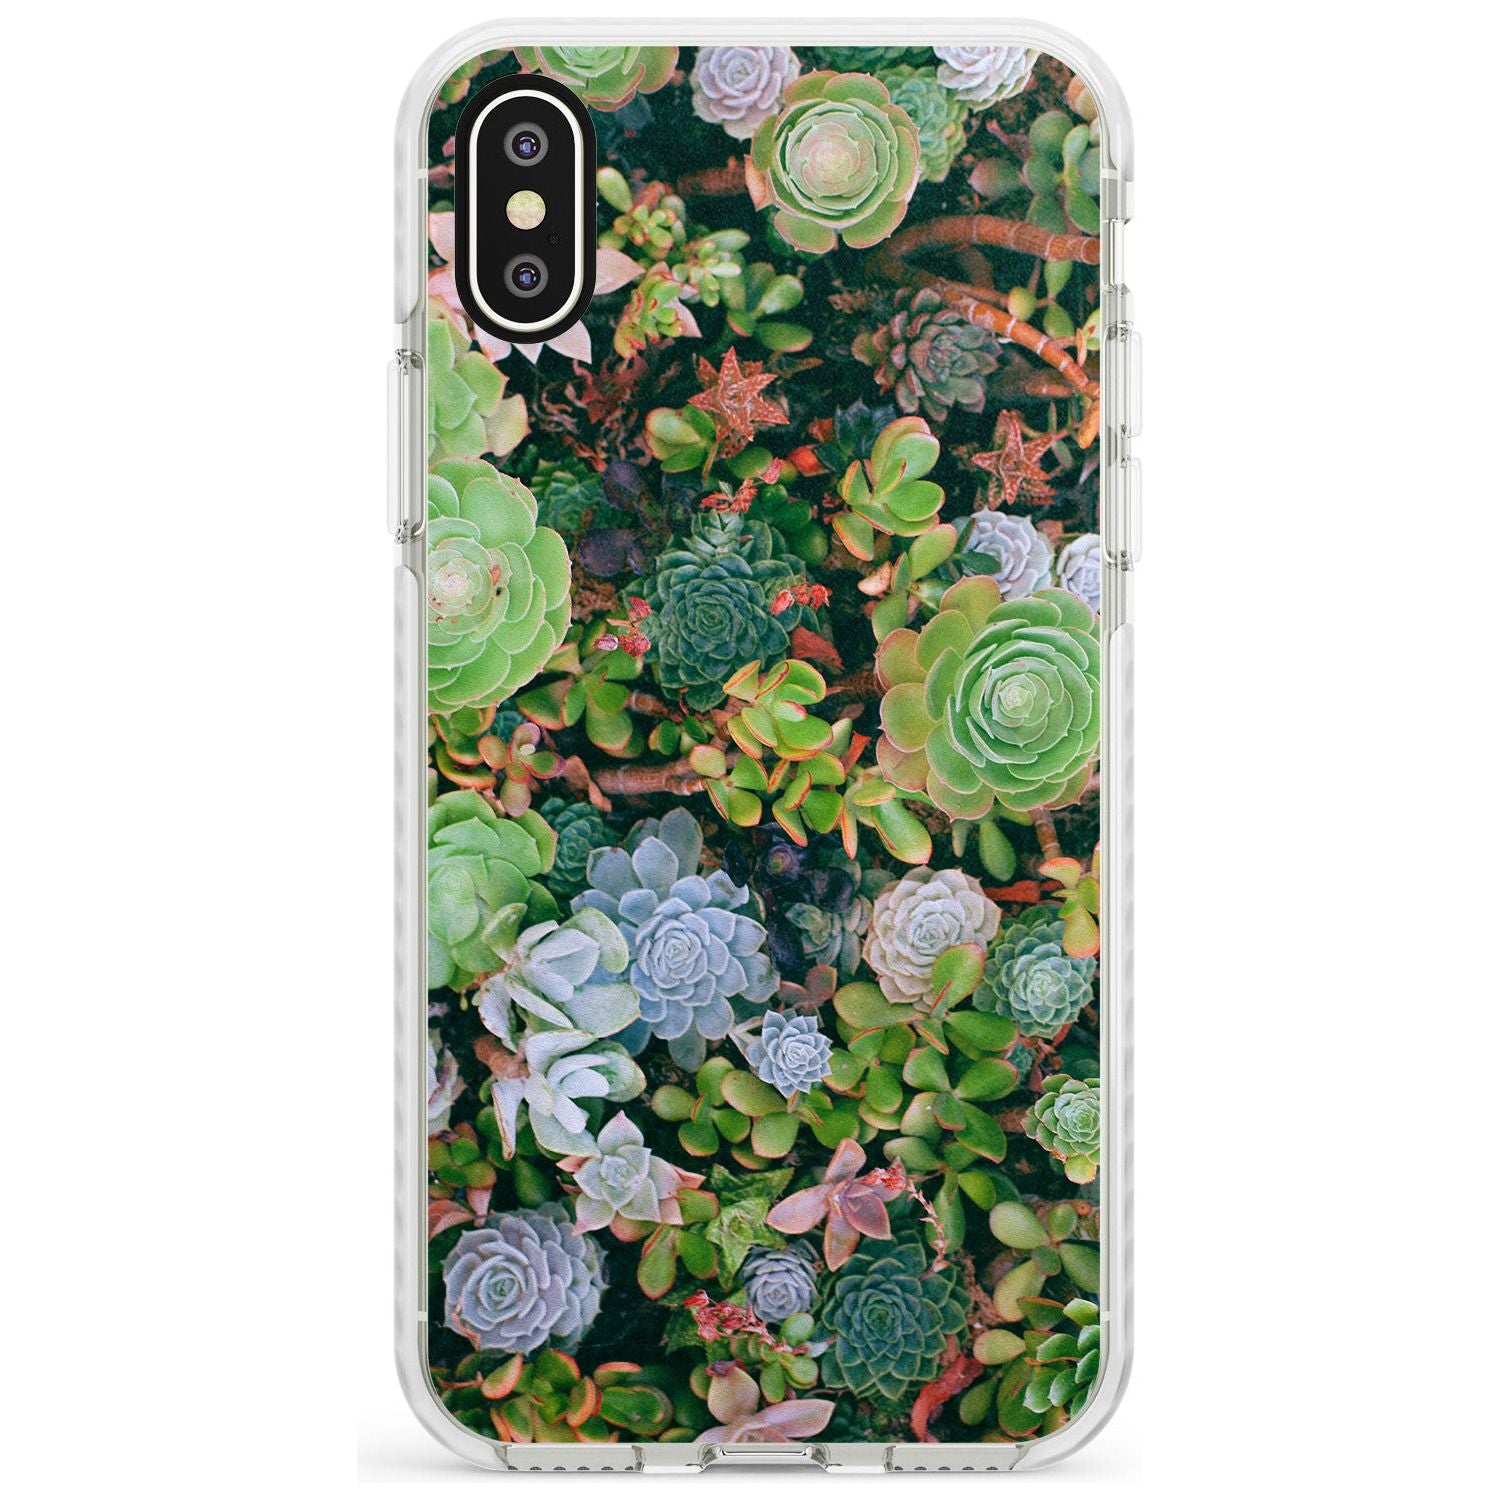 Colourful Succulents Photograph Impact Phone Case for iPhone X XS Max XR